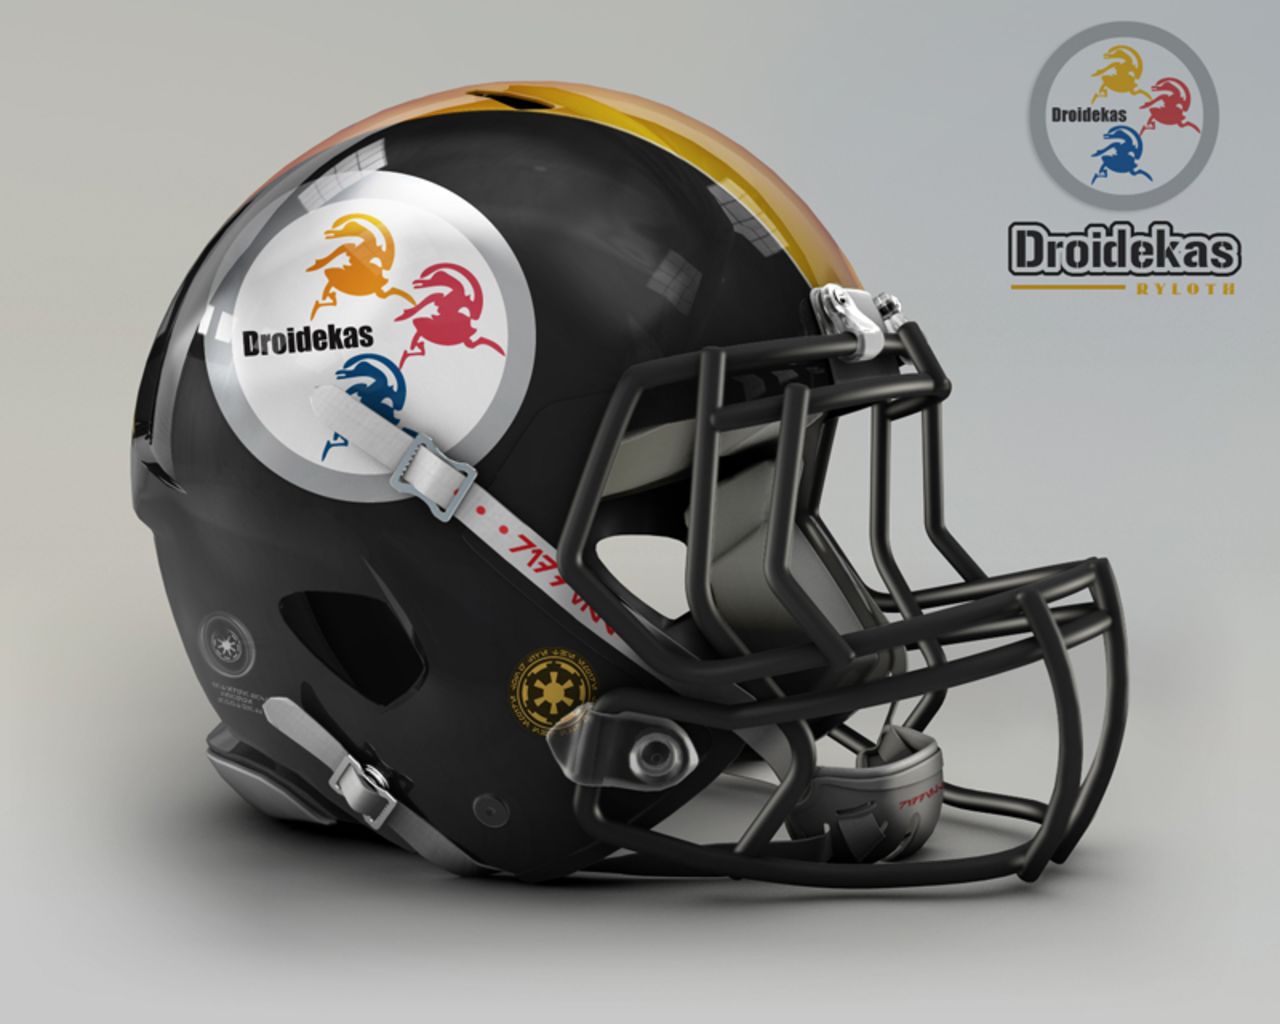 These fearsome battle droids, prominently featured in the prequel trilogy, are a good fit for the<a href="http://www.steelers.com/" target="_blank" target="_blank"> Pittsburgh Steelers</a>, whose logo <a href="http://www.steelers.com/history/logo-history.html" target="_blank" target="_blank">originally referenced </a>the Steelmark logo of the American Iron and Steel Institute.